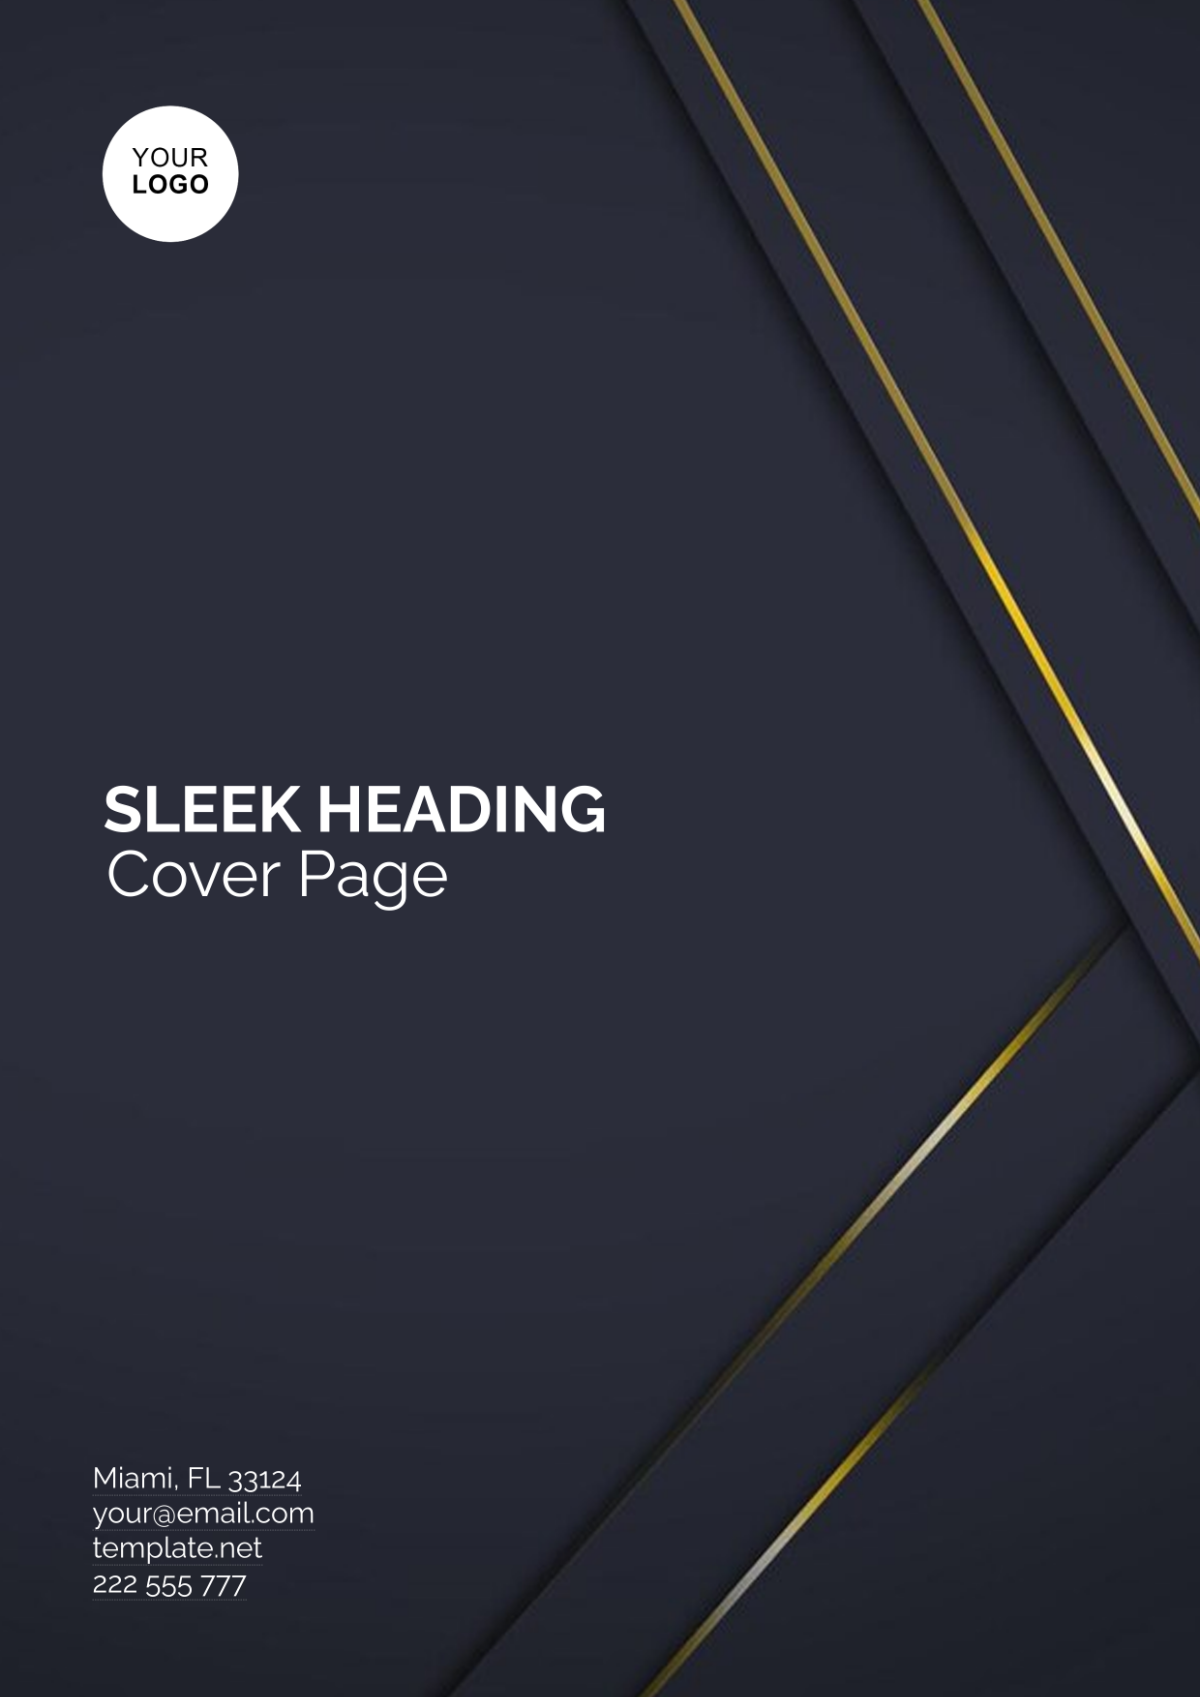 Sleek Heading Cover Page Template